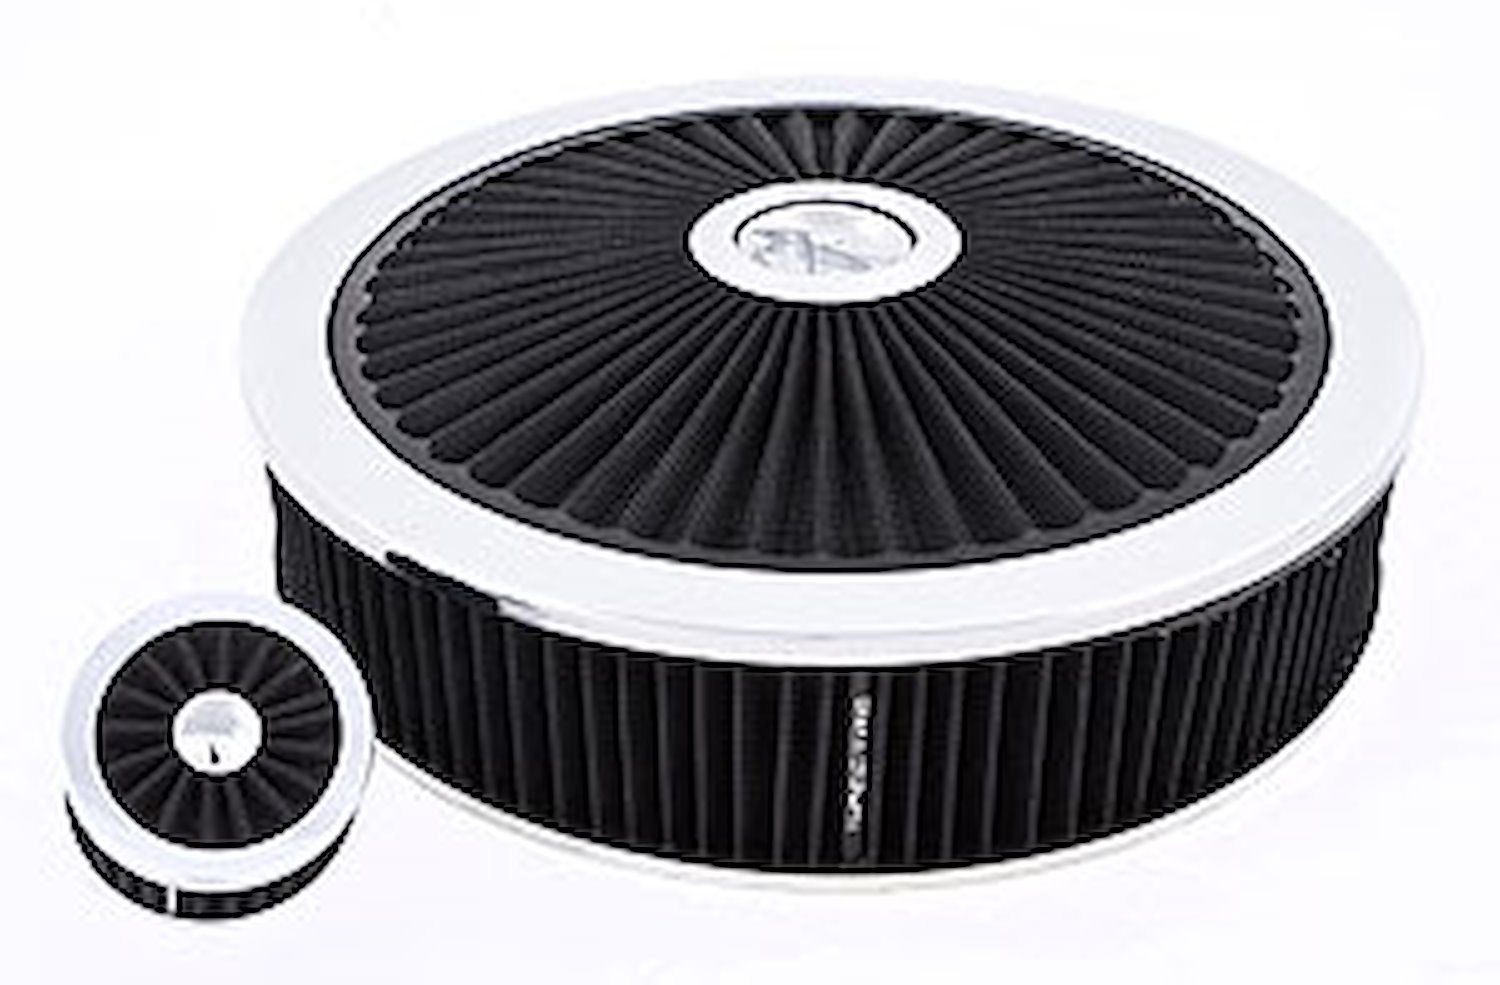 Extraflow Air Cleaner Includes: Black 14